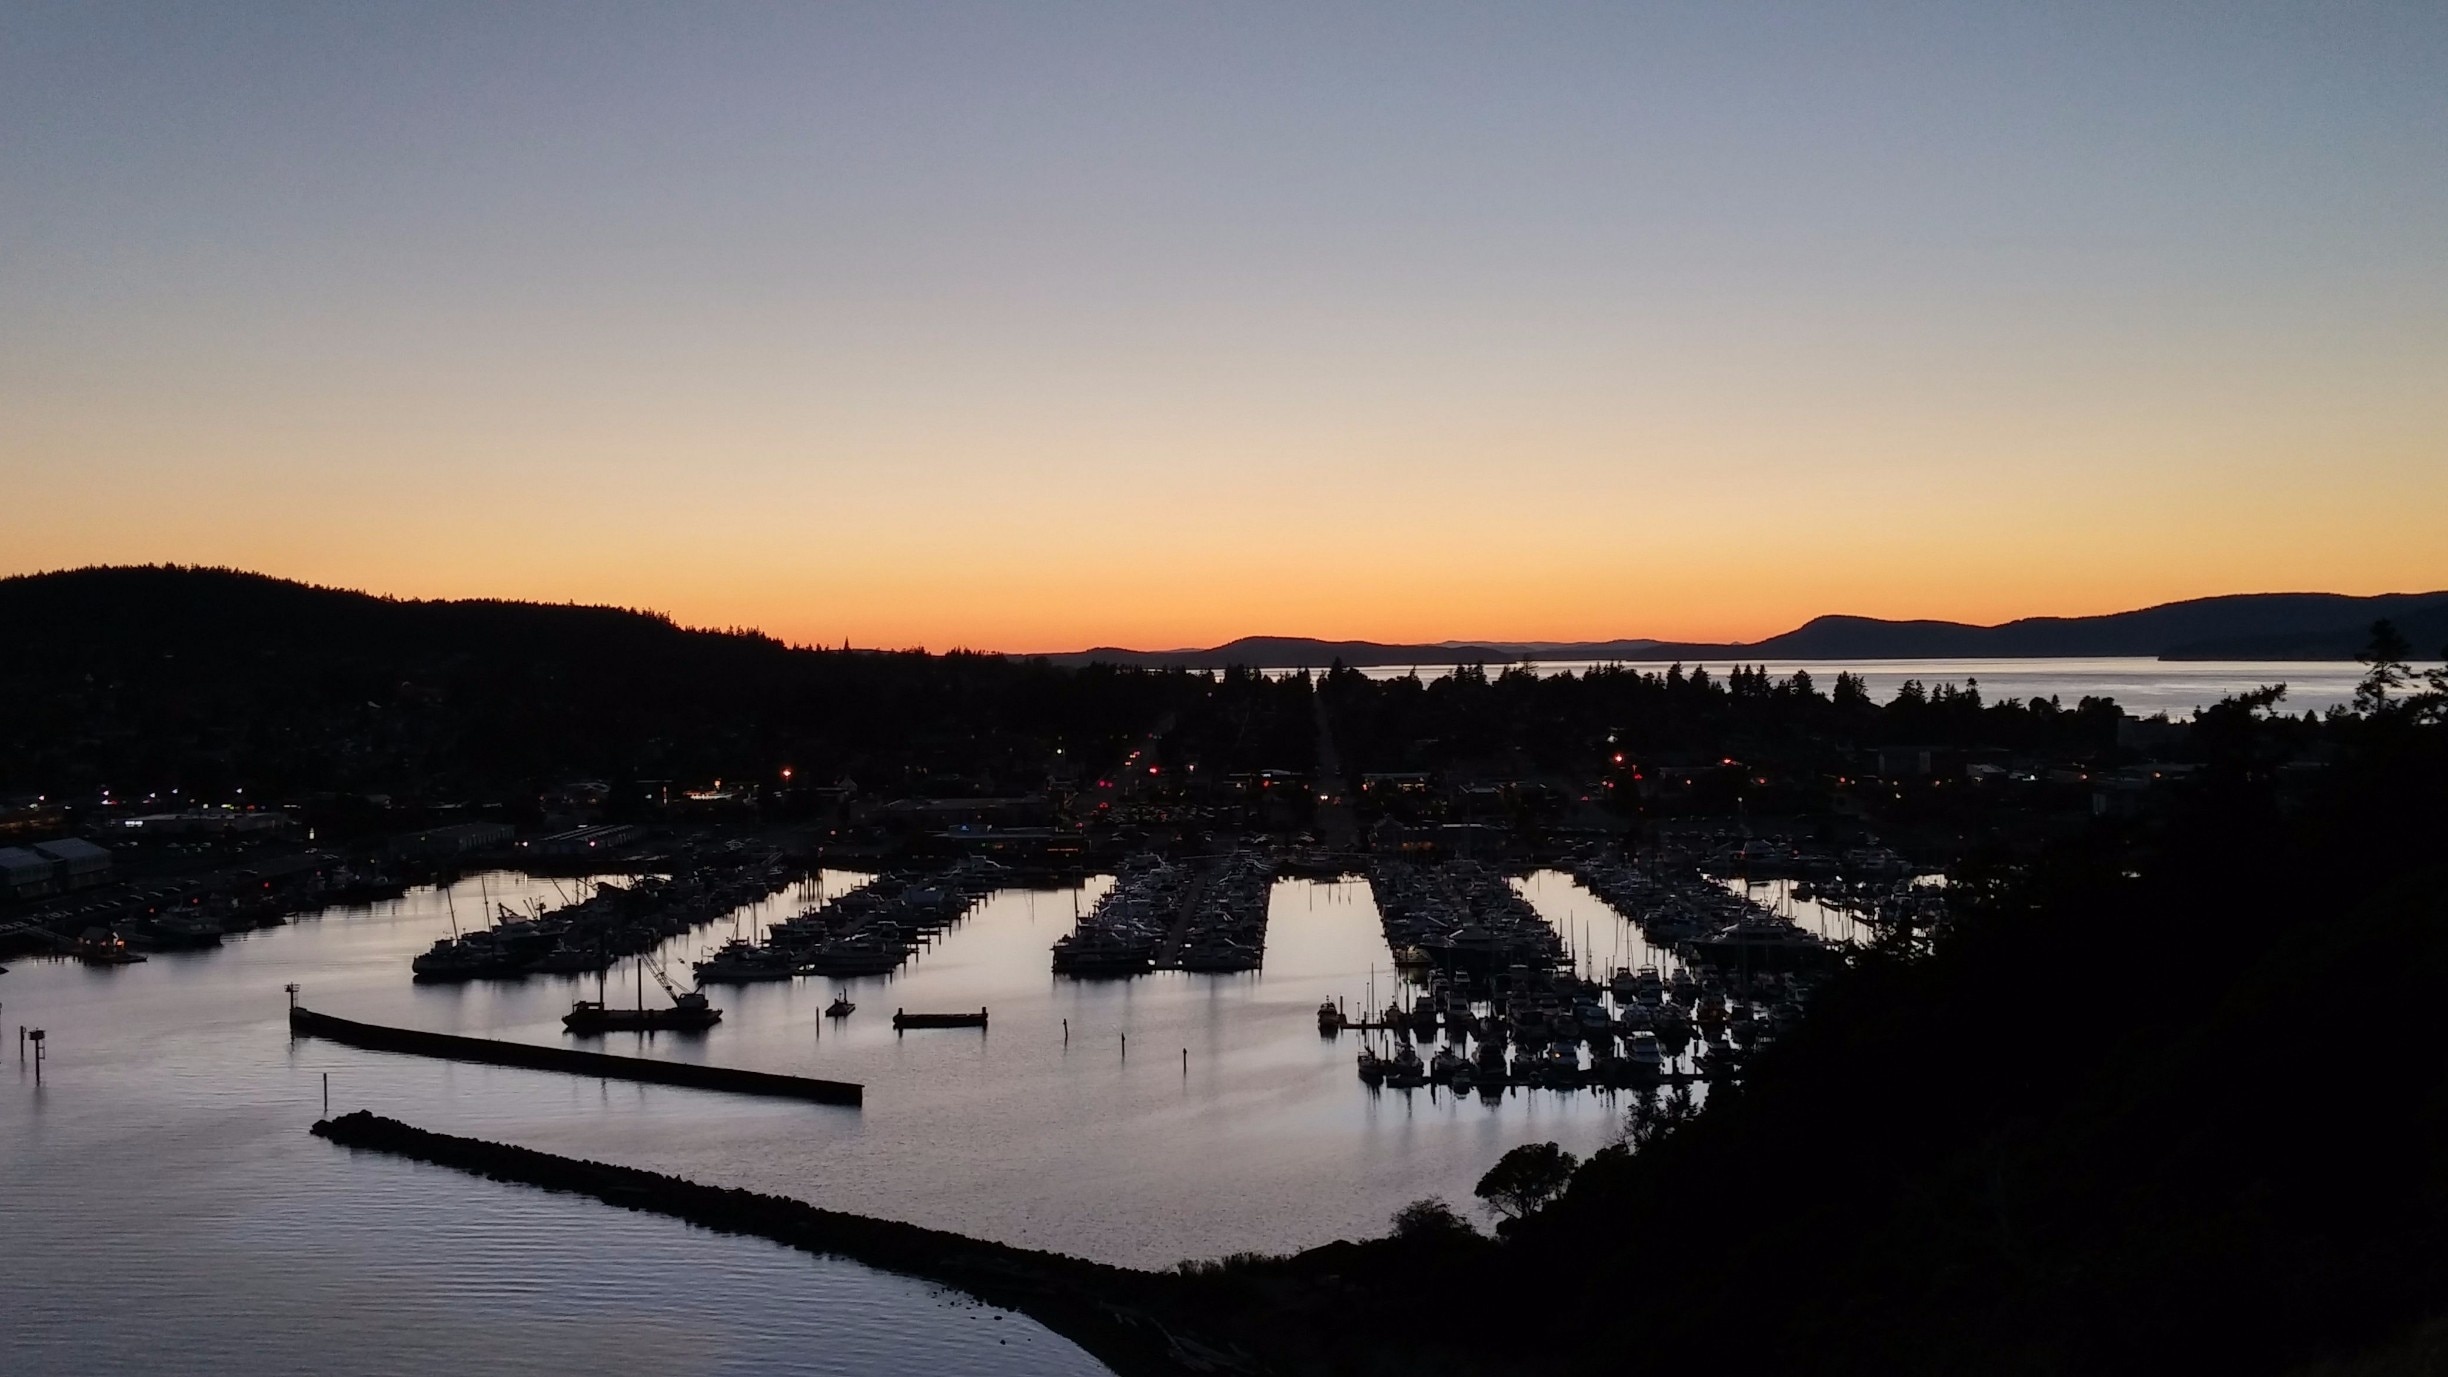 View from the top of Cap Sante Park looking west to Cap Sante Marina and the San Juan Islands in the distance. 

This is a very popular spot in Ancortes as it almost has a 360 degree view, which includes Mt. Baker, and on a clear day Mt. Rainier.
#sunset #weekendgetawayUSA